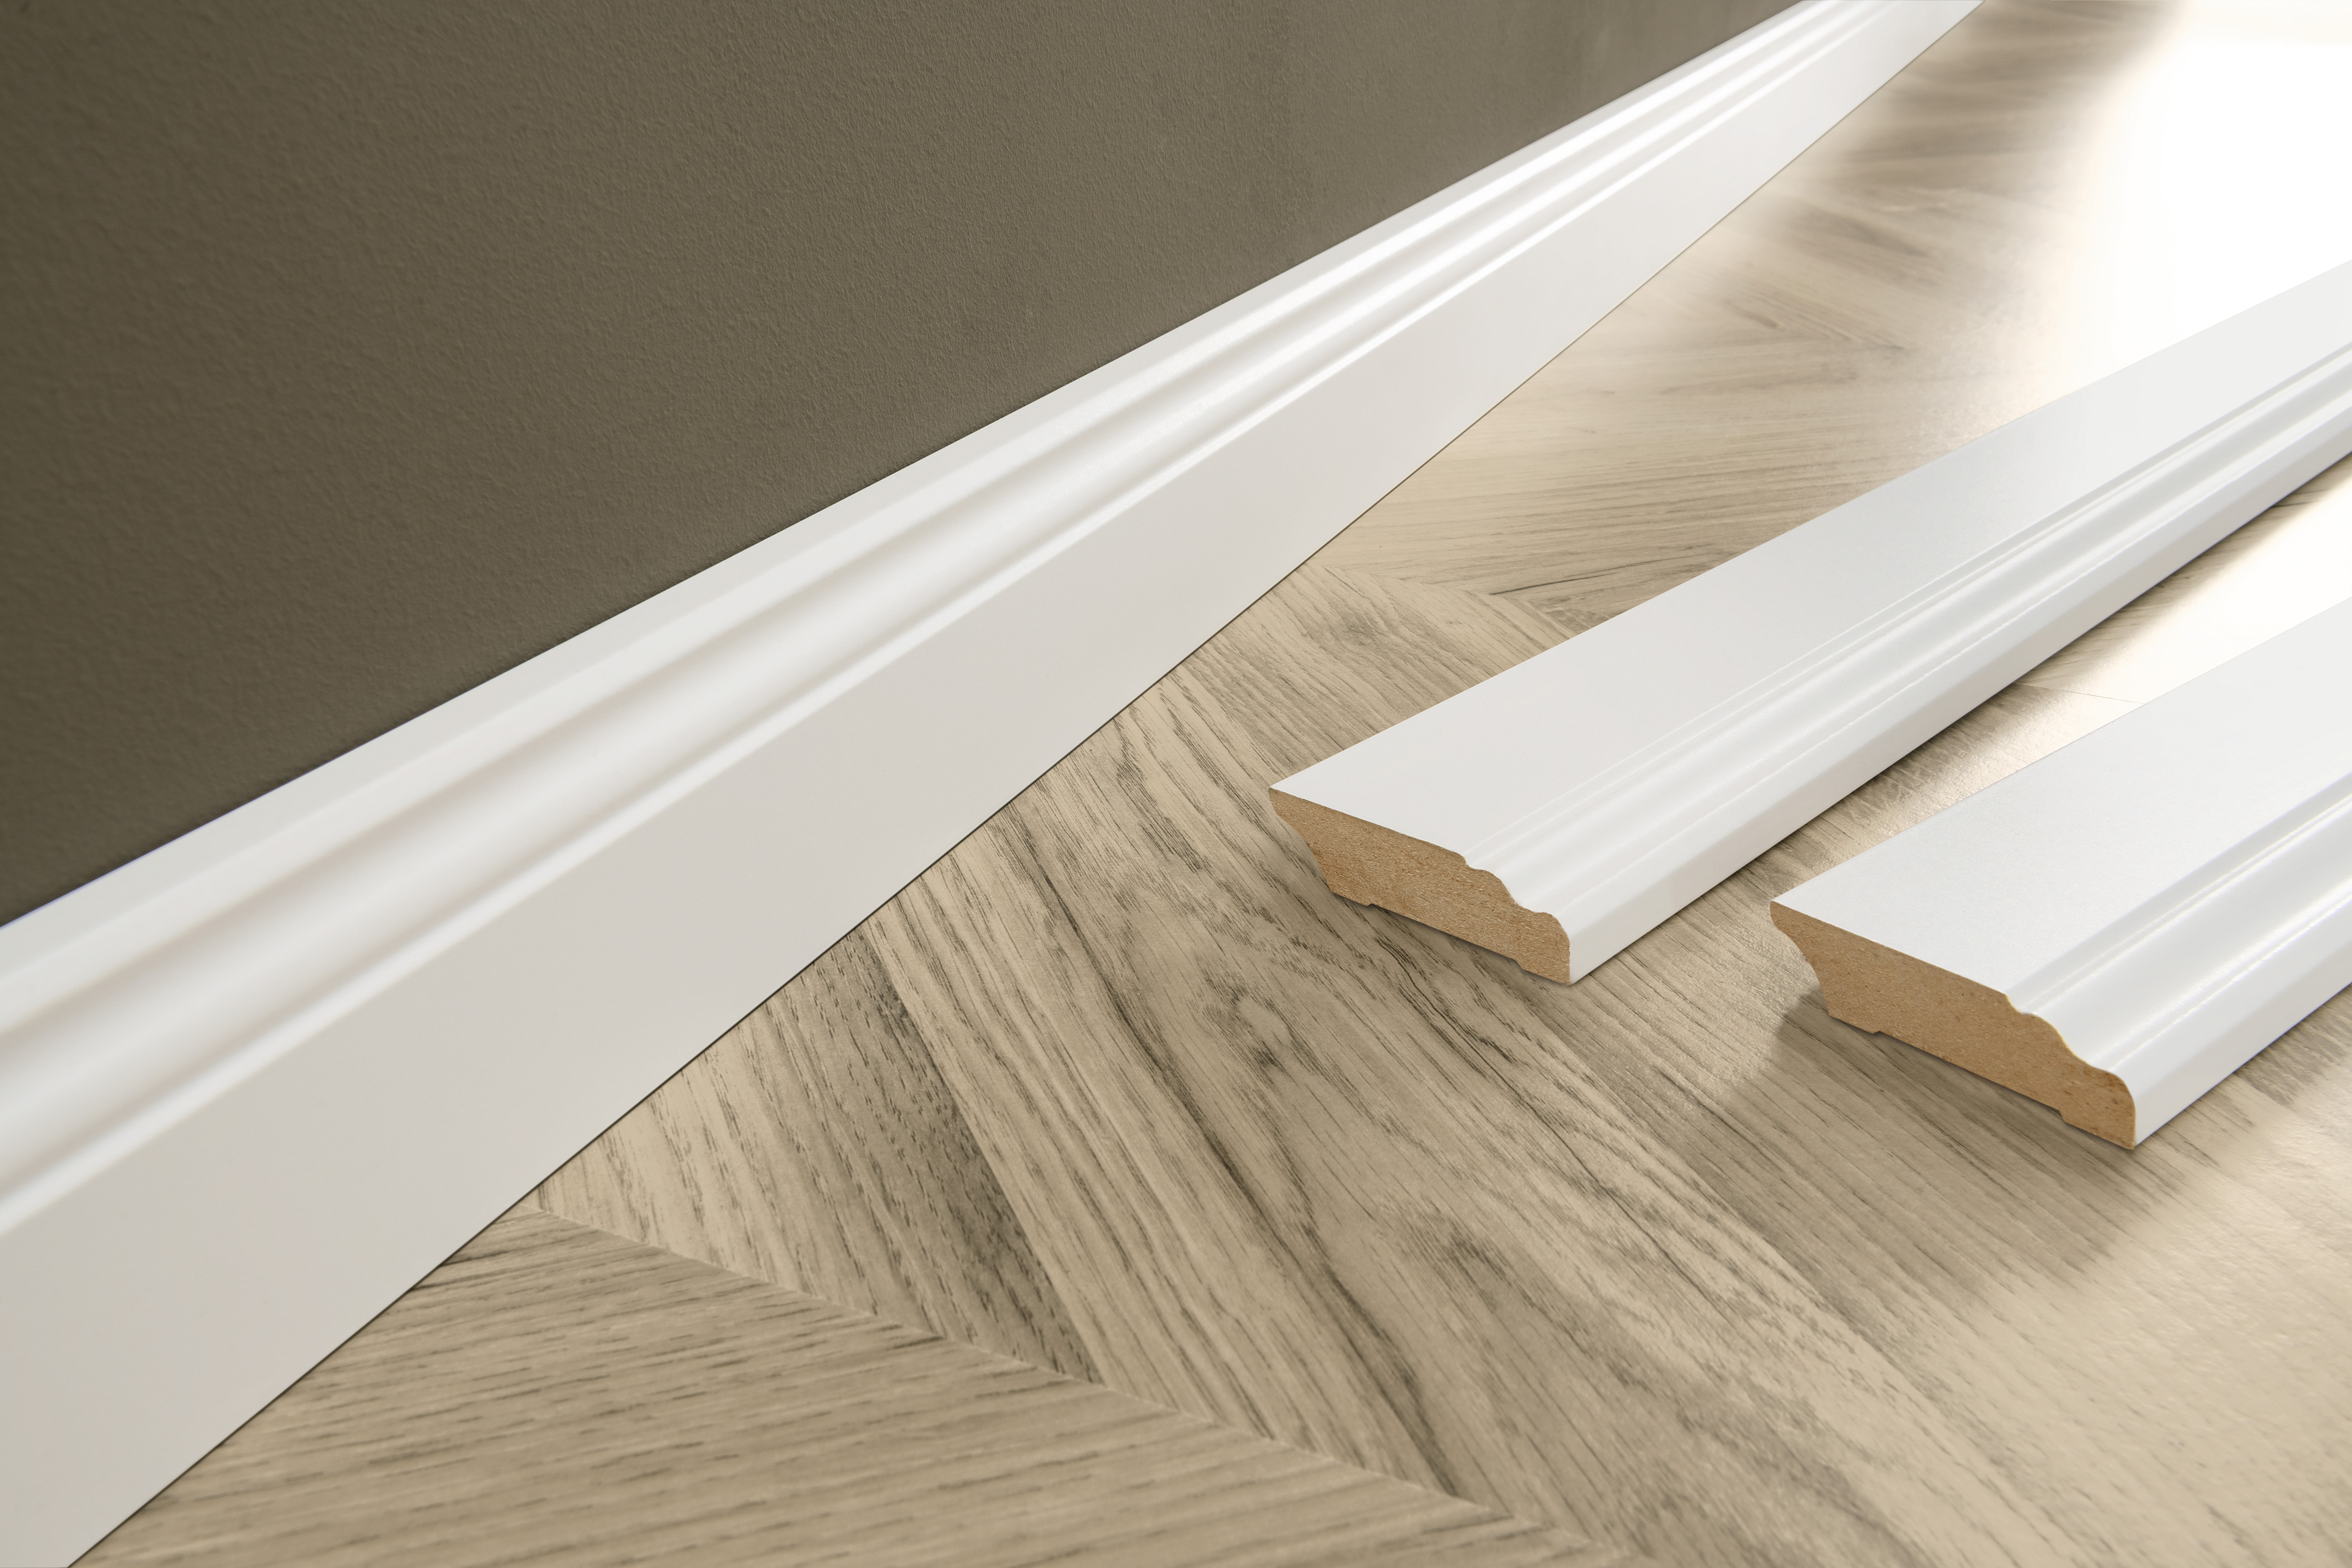 Flooring structure and product details